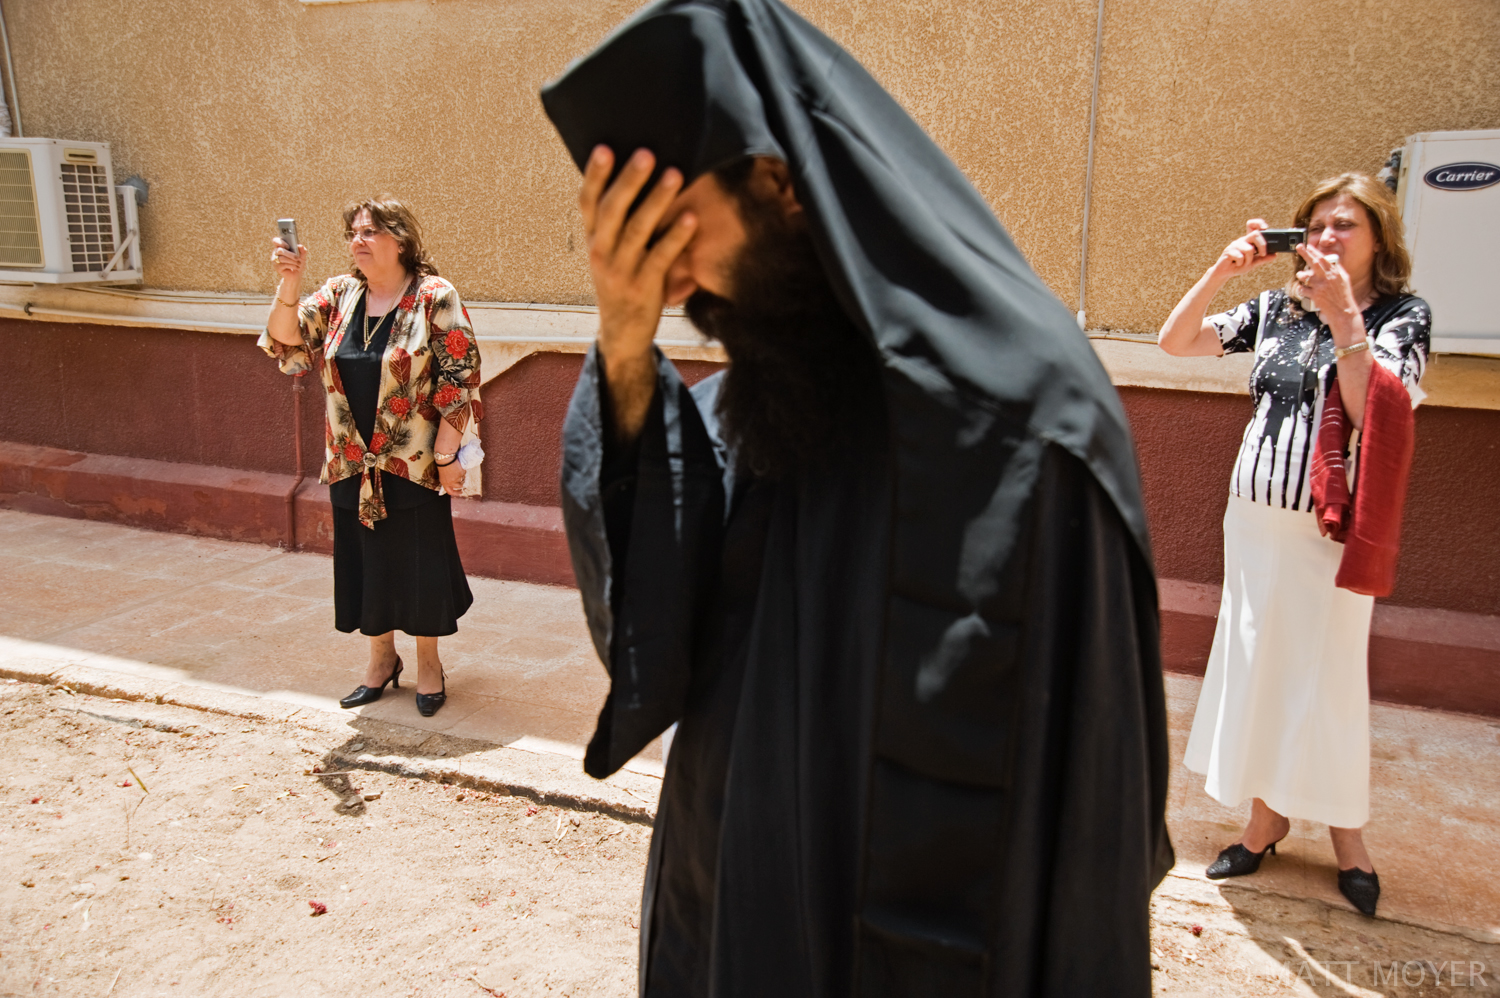  A monk of the Saint Catherine Monastery reacts as tourist take photographs of a religious procession. Tens of thousands of tourist descend upon the ancient monestary every year. 